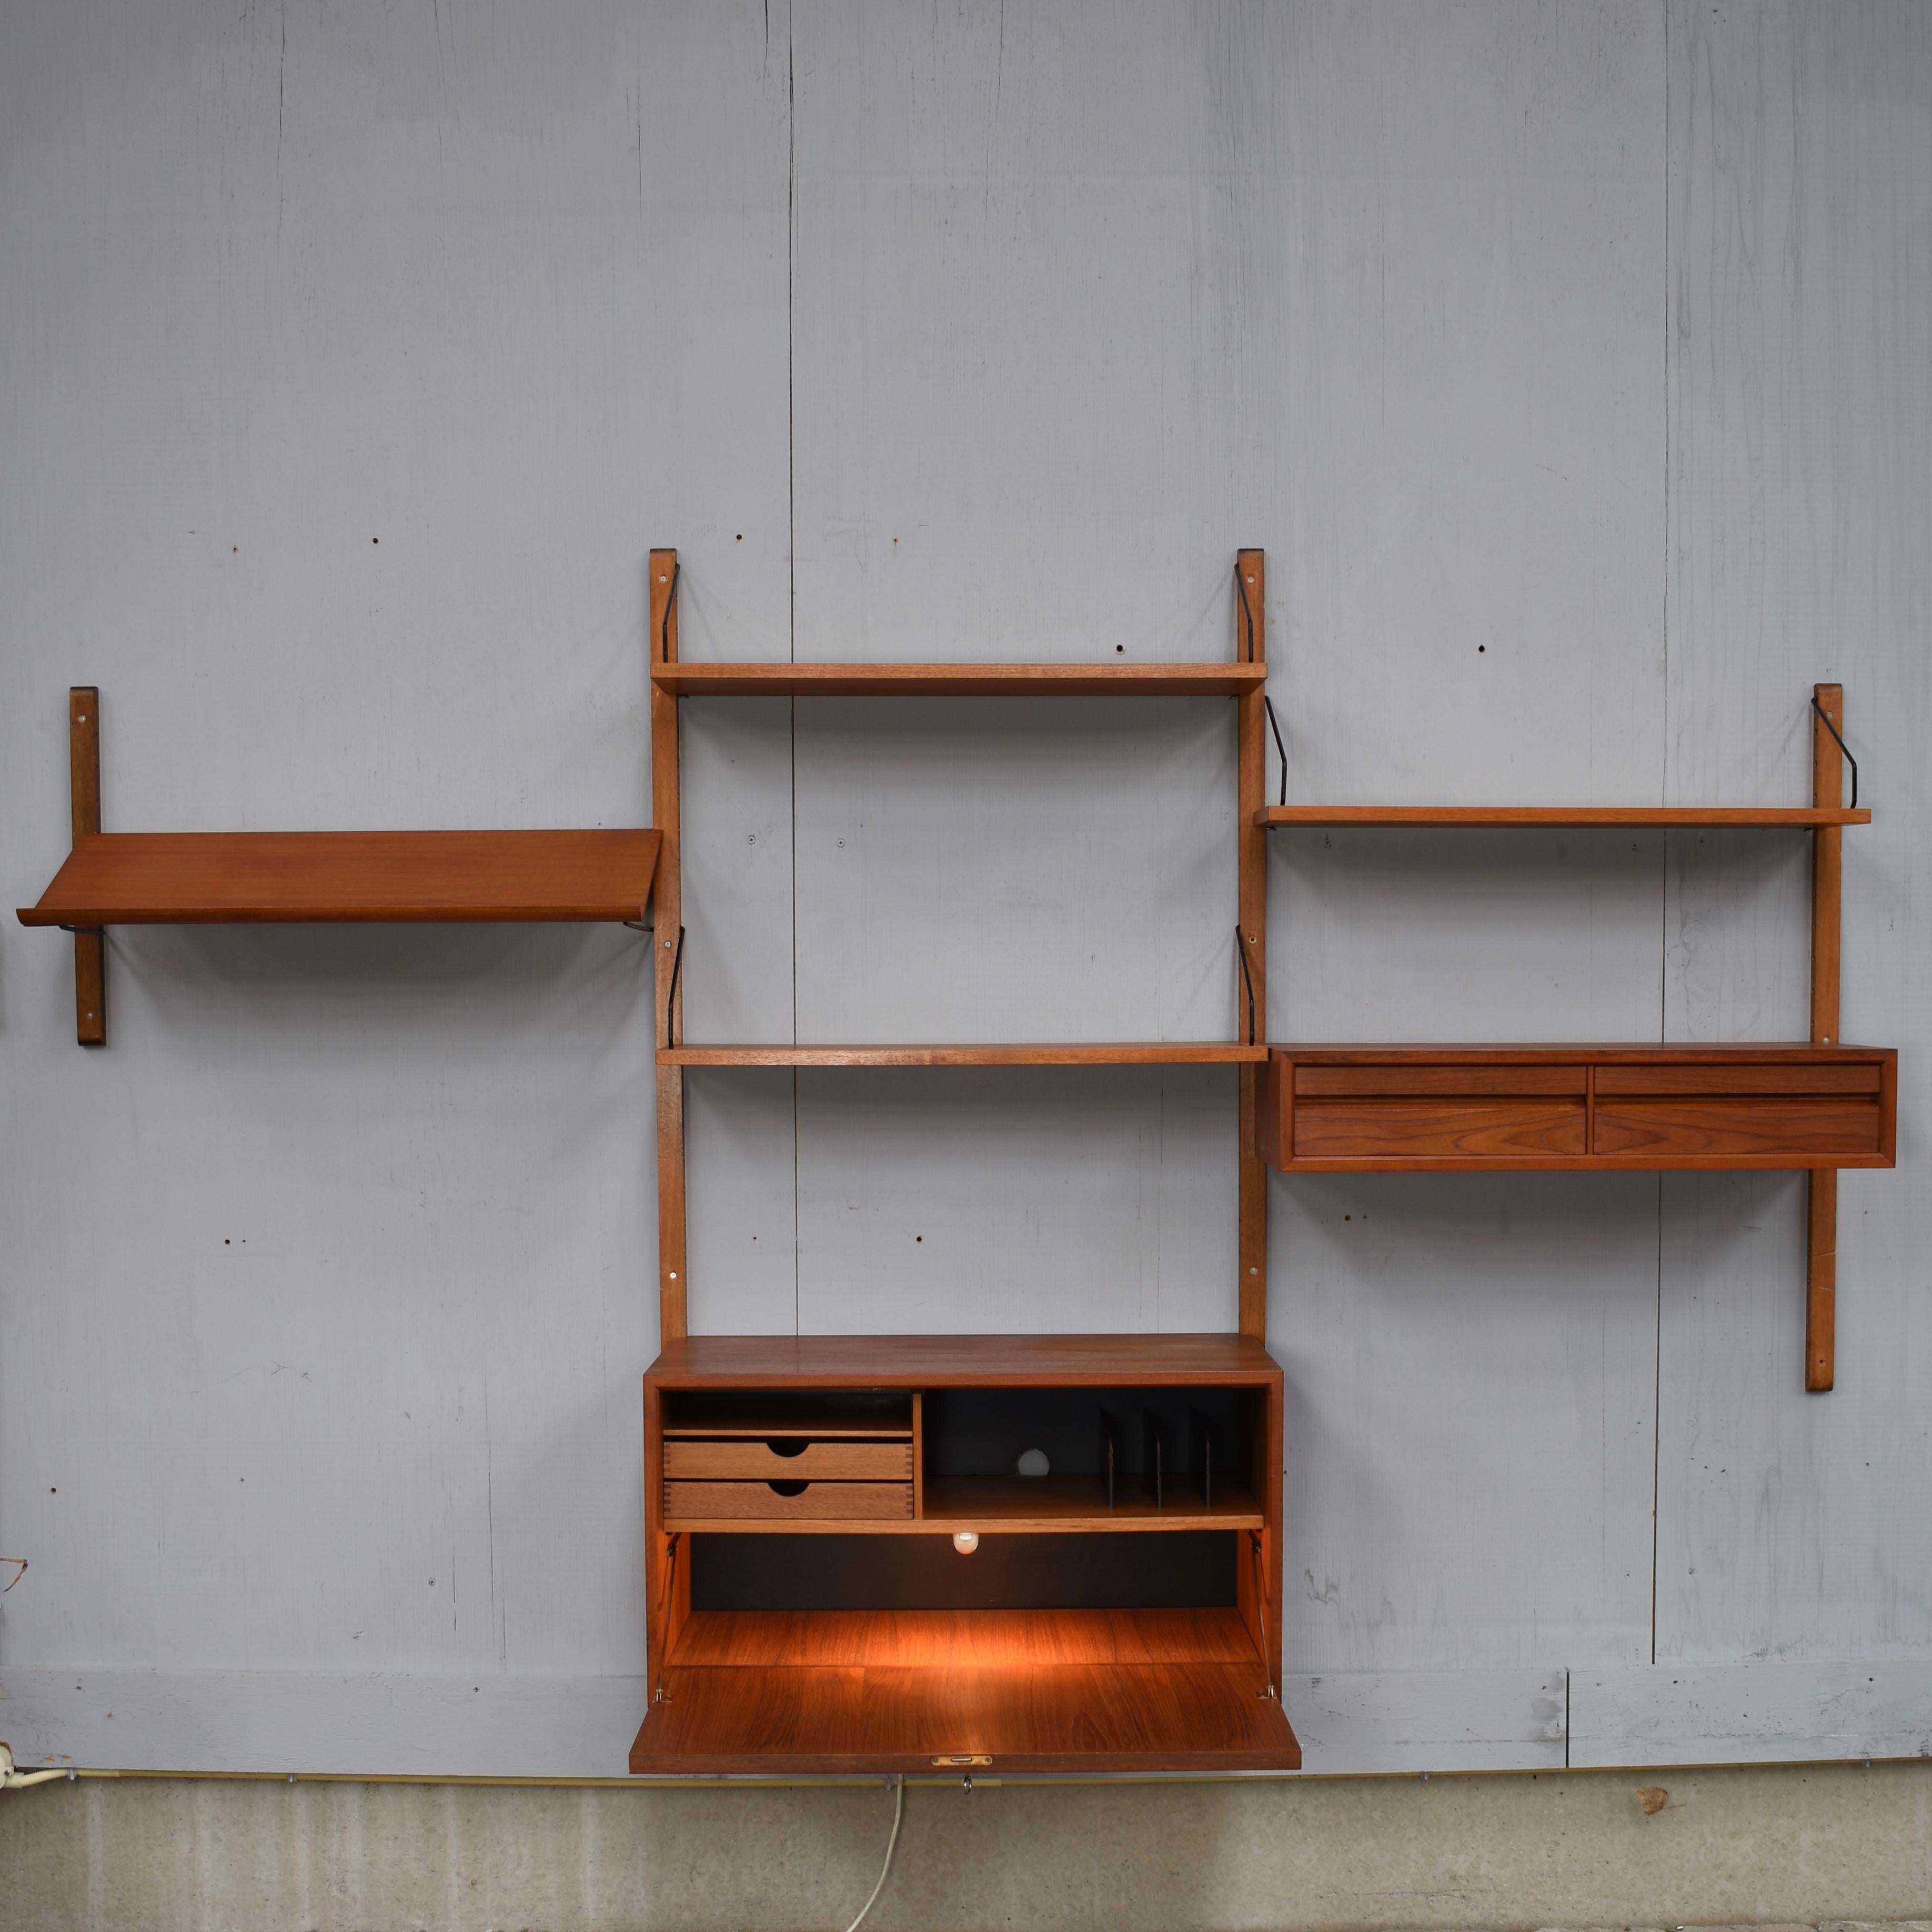 Beautiful Royal series wall unit by Poul Cadovius with much wanted angled lecture shelve. In a beautiful warm wood color and in good condition.
This unit features:

– 1 much wanted lecture shelve

– 1 desk cabinet with built-in light

– 1